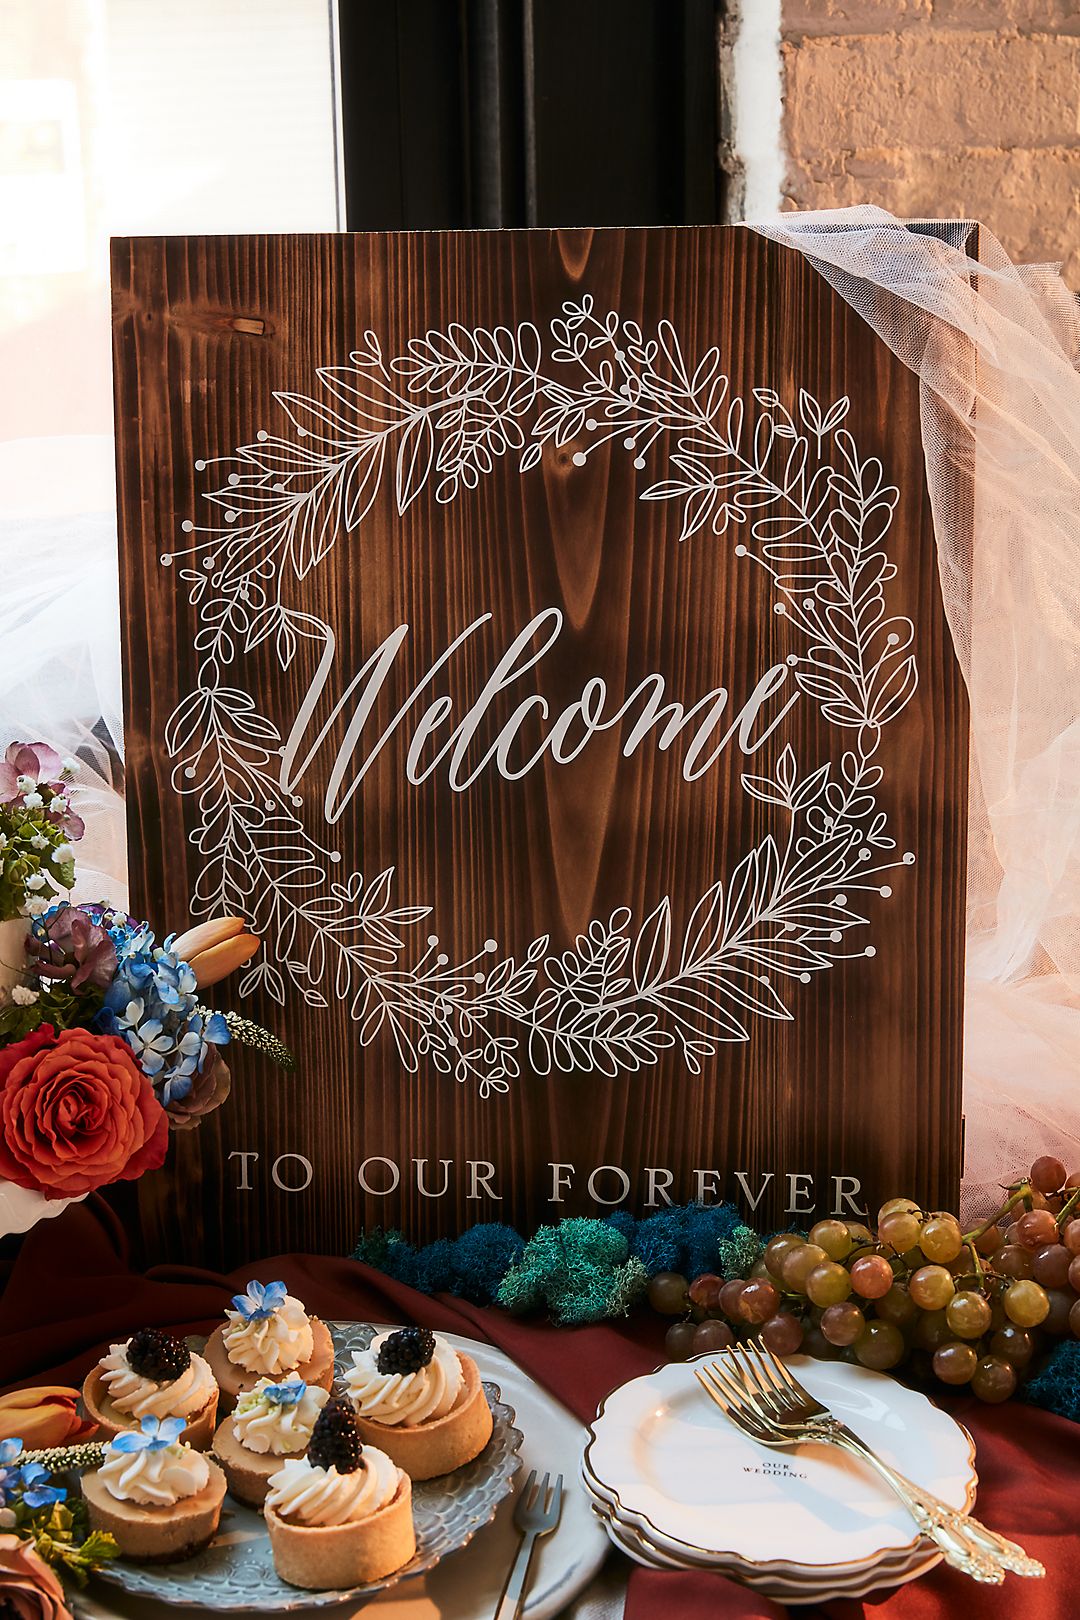 Welcome To Our Forever Wood Sign Image 2